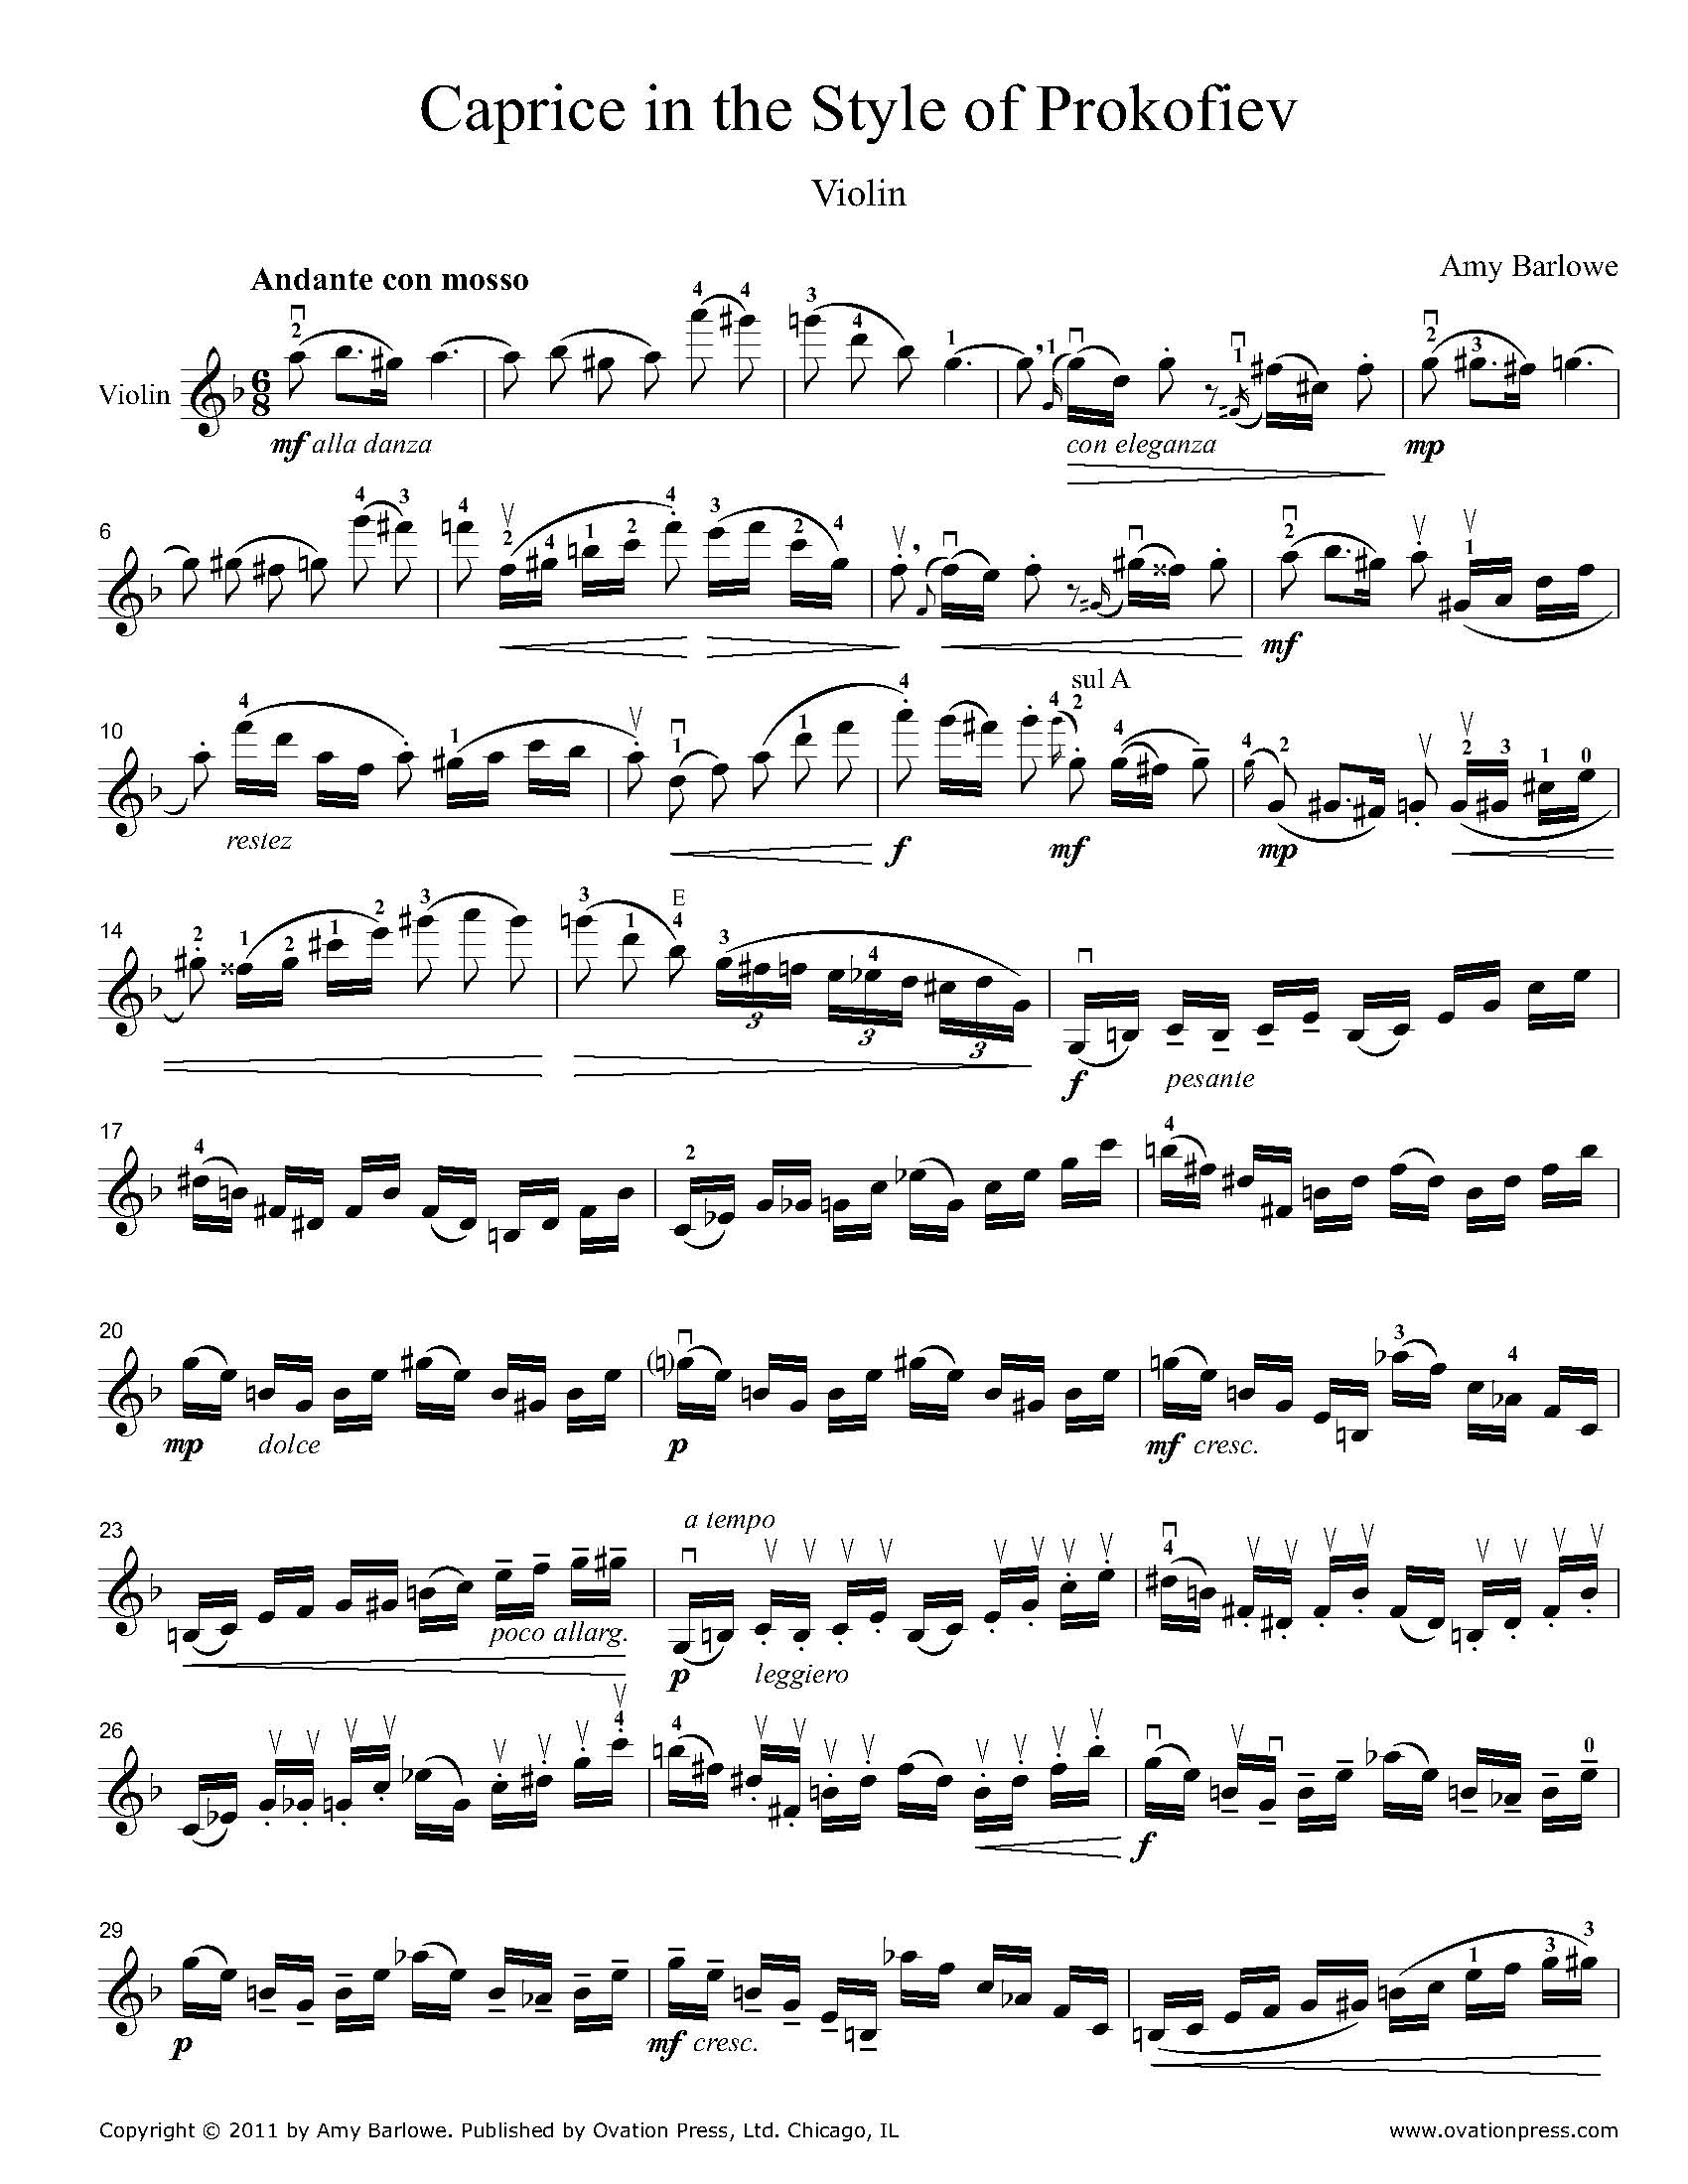 Caprice in the Style of Prokofiev for Violin